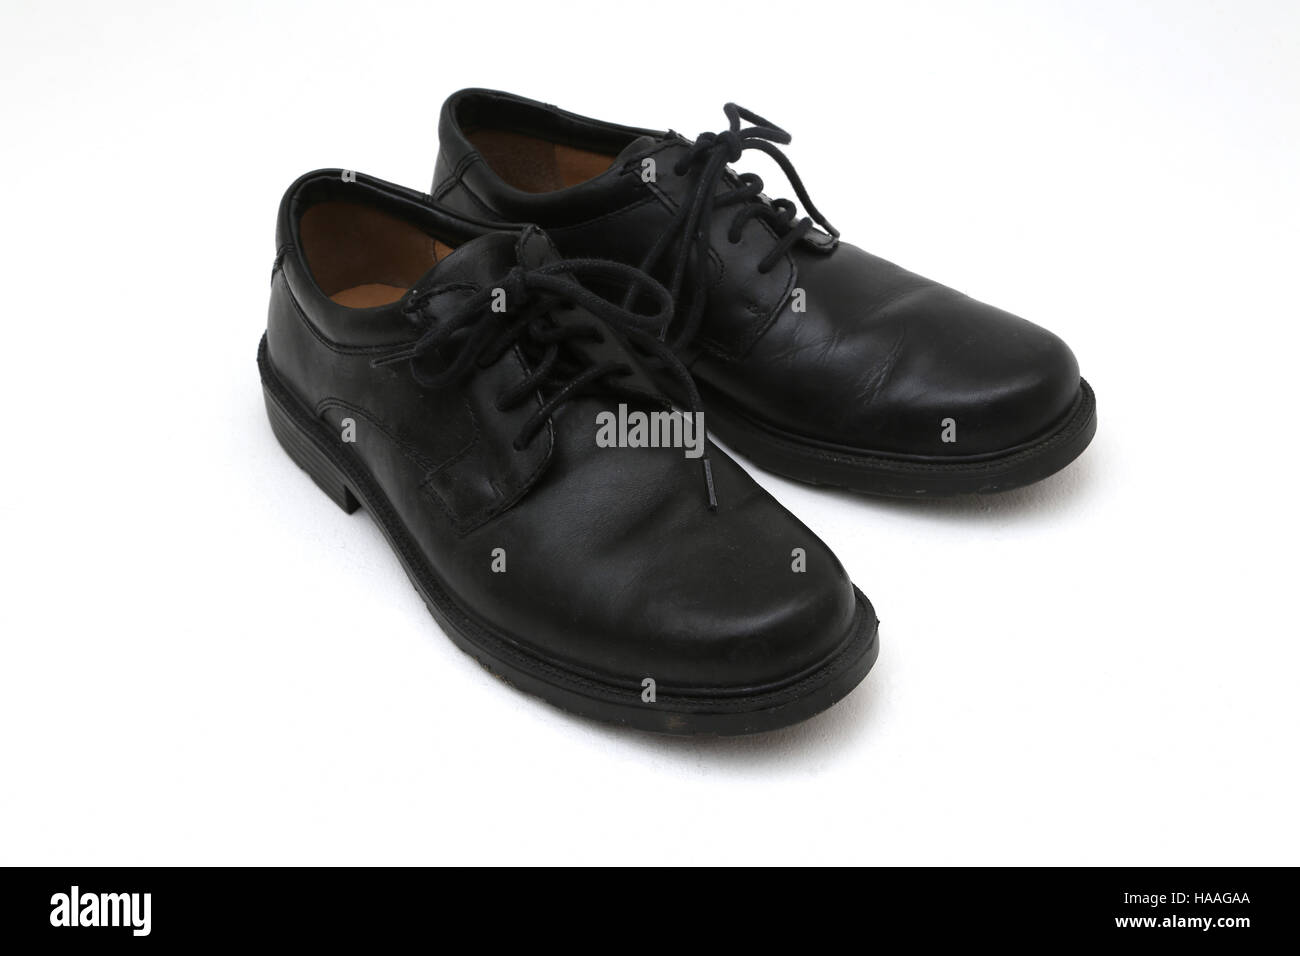 A Pair Of Men's Black Leather Shoes Stock Photo